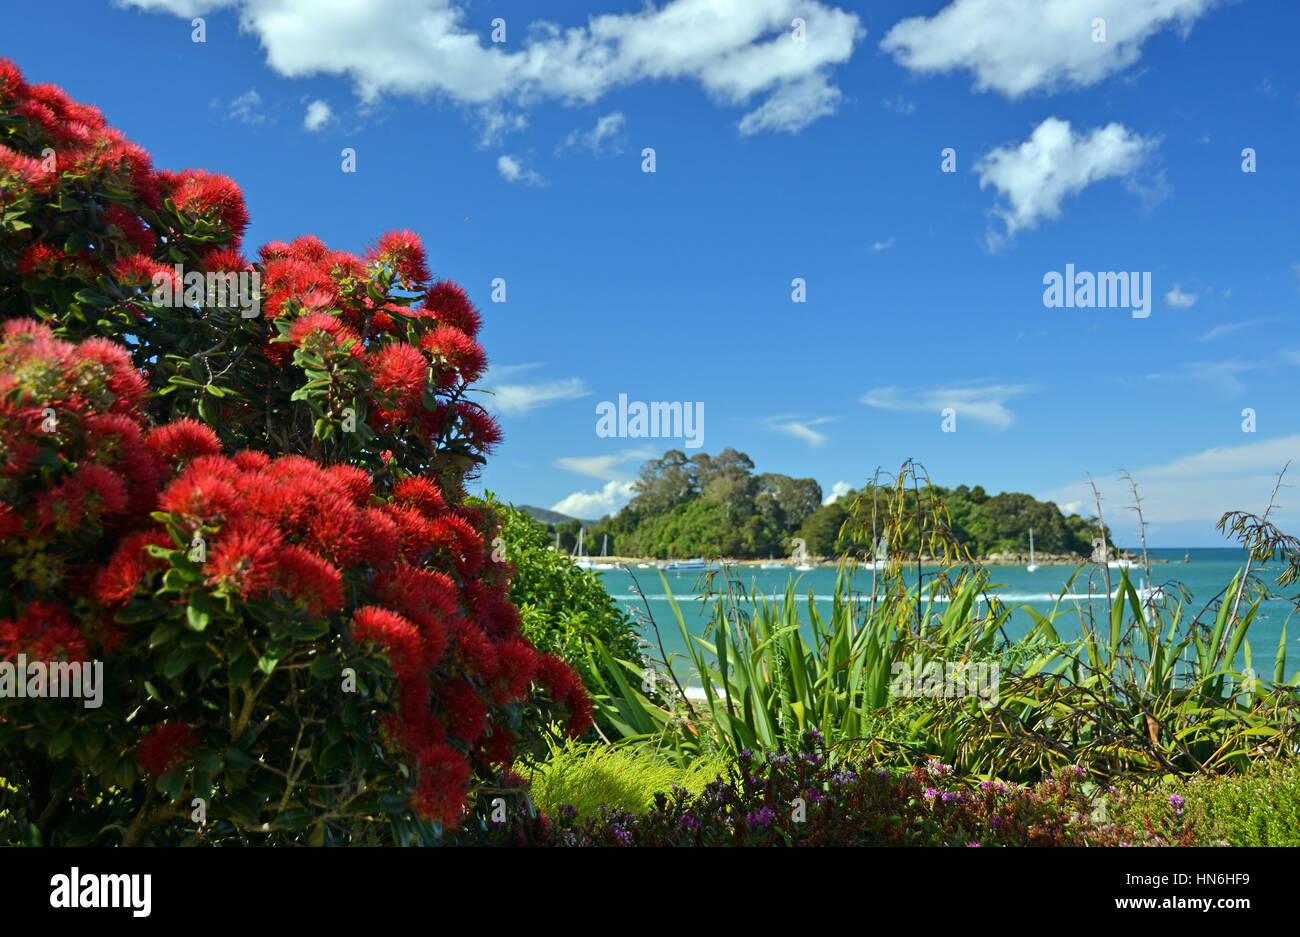 Pohutukawas, the national flower of New Zealand, in full bloom at Little  Kaiteriteri beach with copy space. Stock Photo